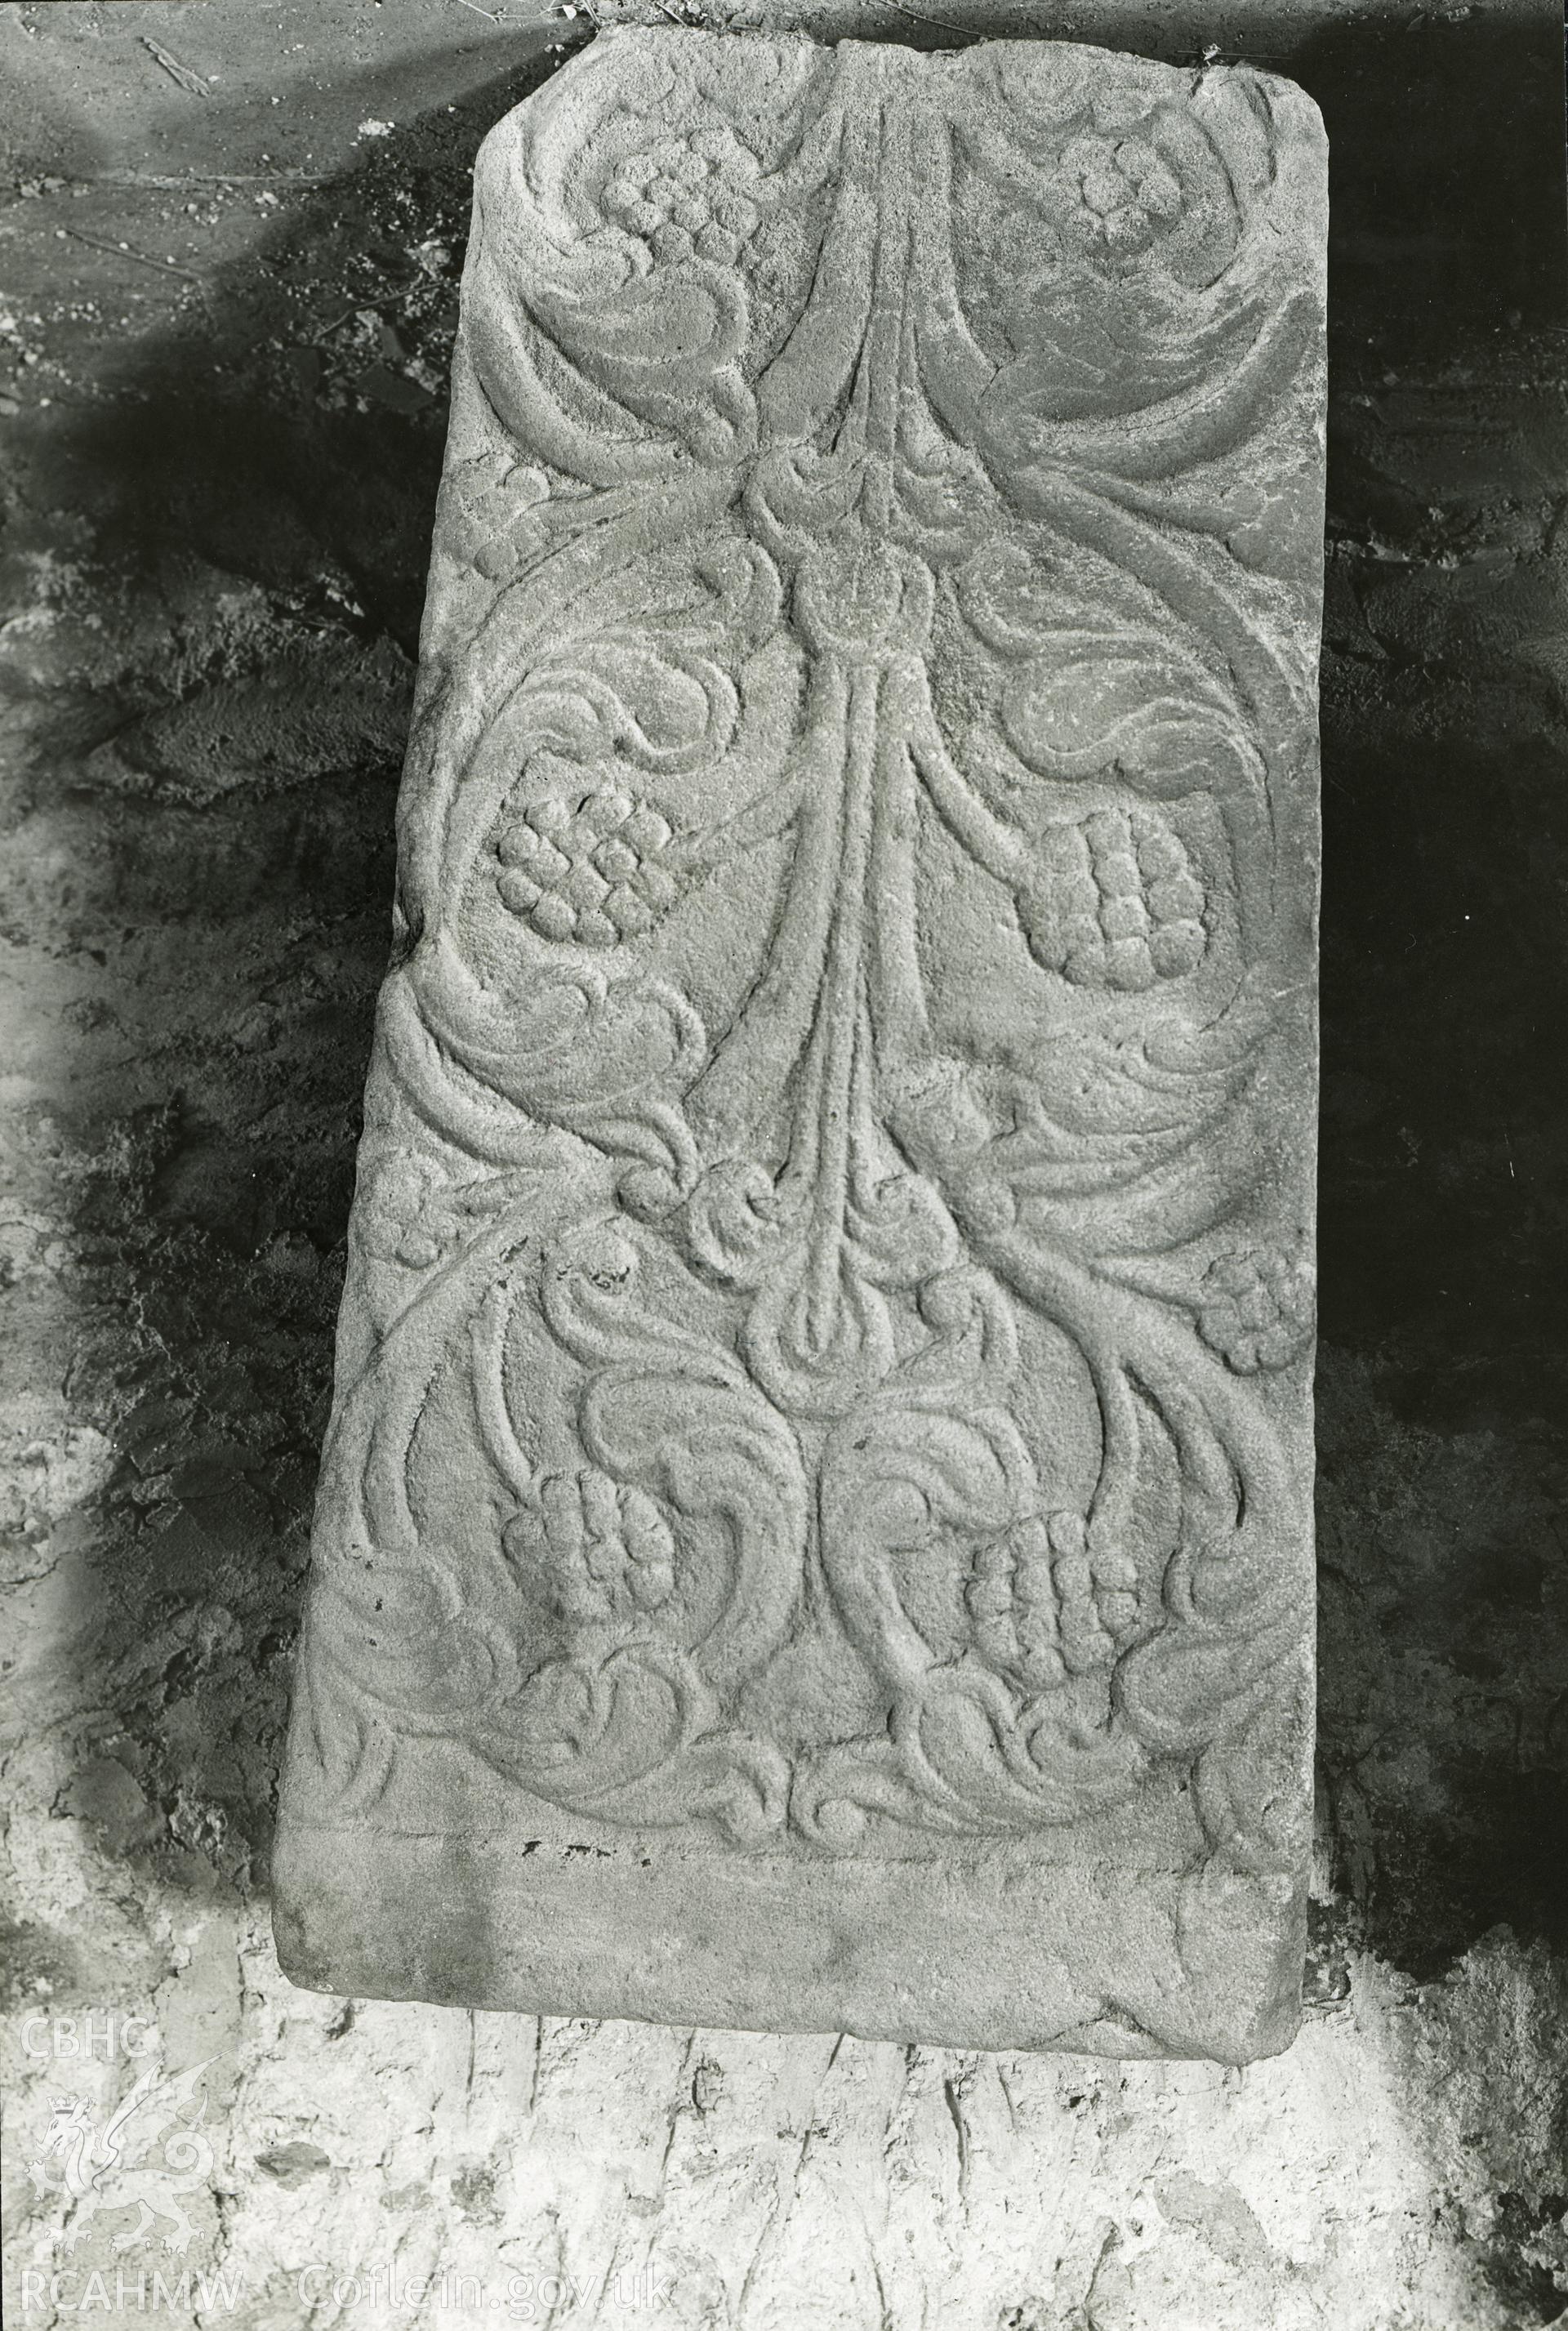 Digitised copy of a black and white print showing grave slab at Valle Crucis Abbey taken by F.H. Crossley, 1947. Negative held by NMR England.